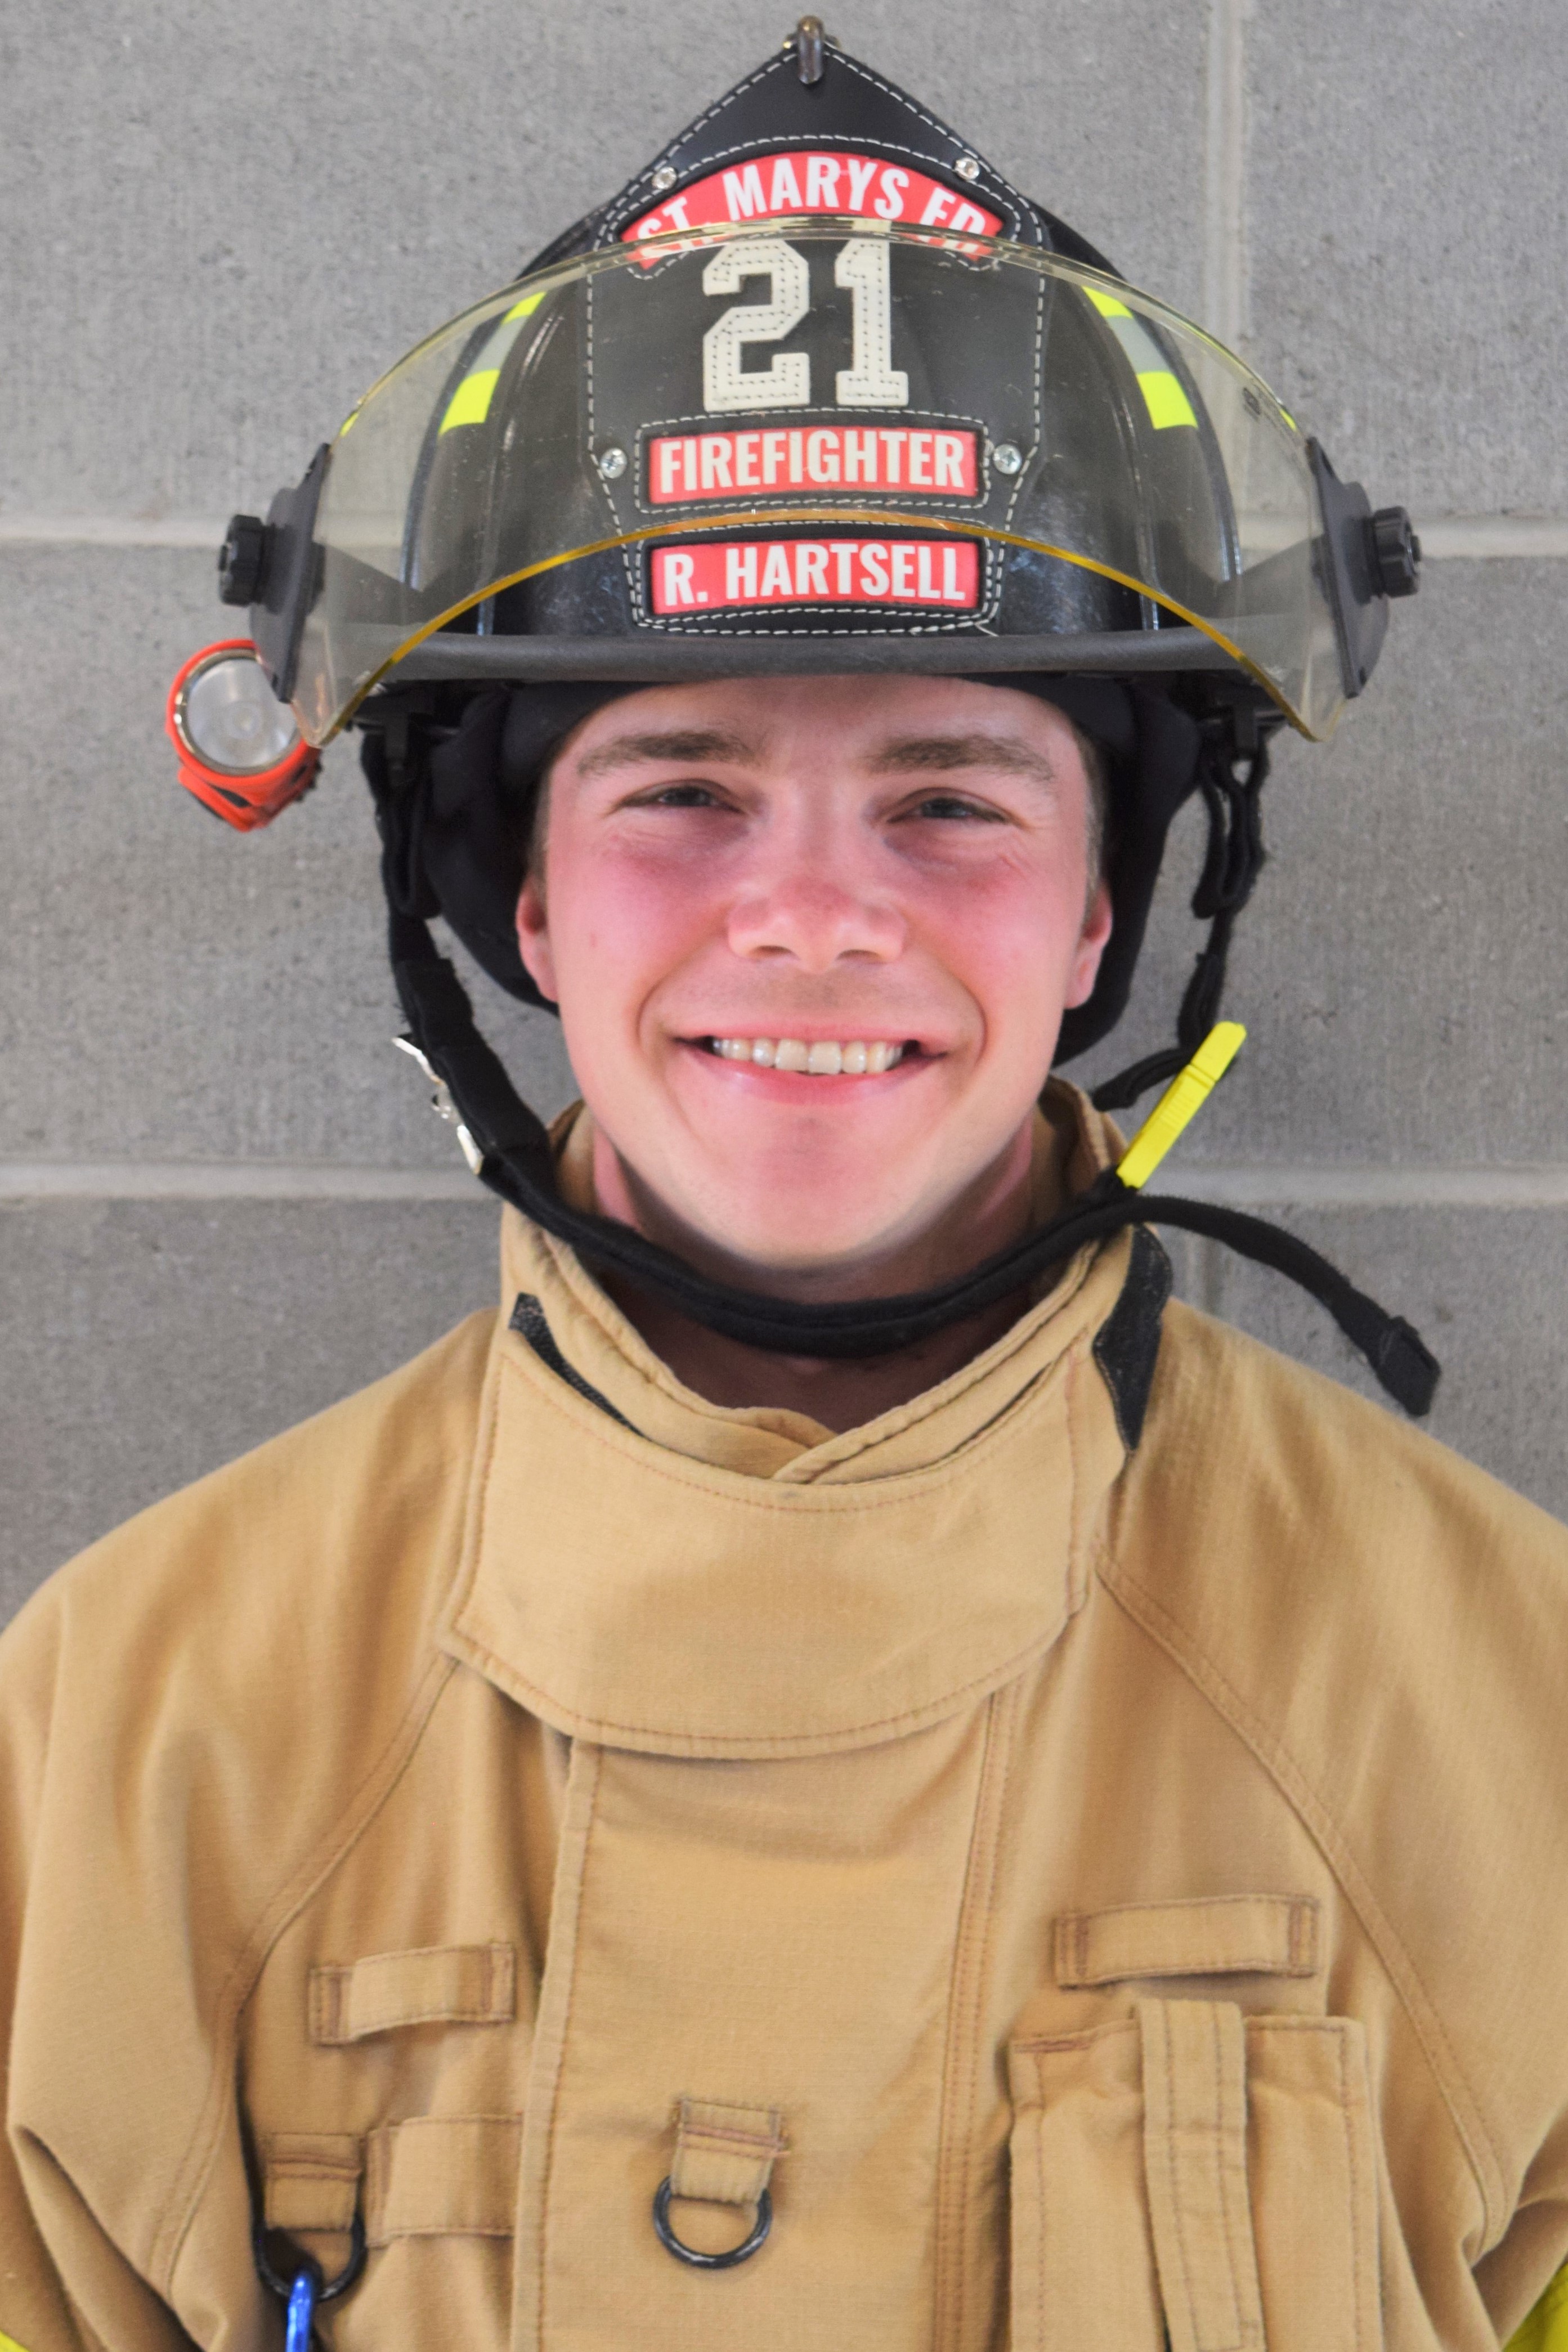 Firefighter Ryan Hartsell named “Firefighter of the Month” for August.